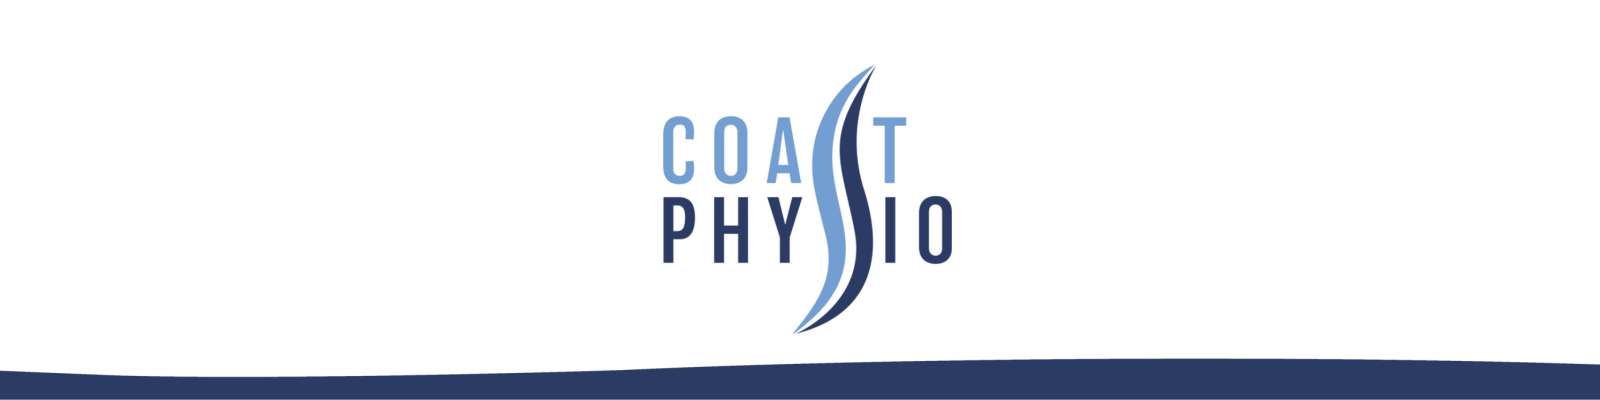 Coastphysio services in East Sussex